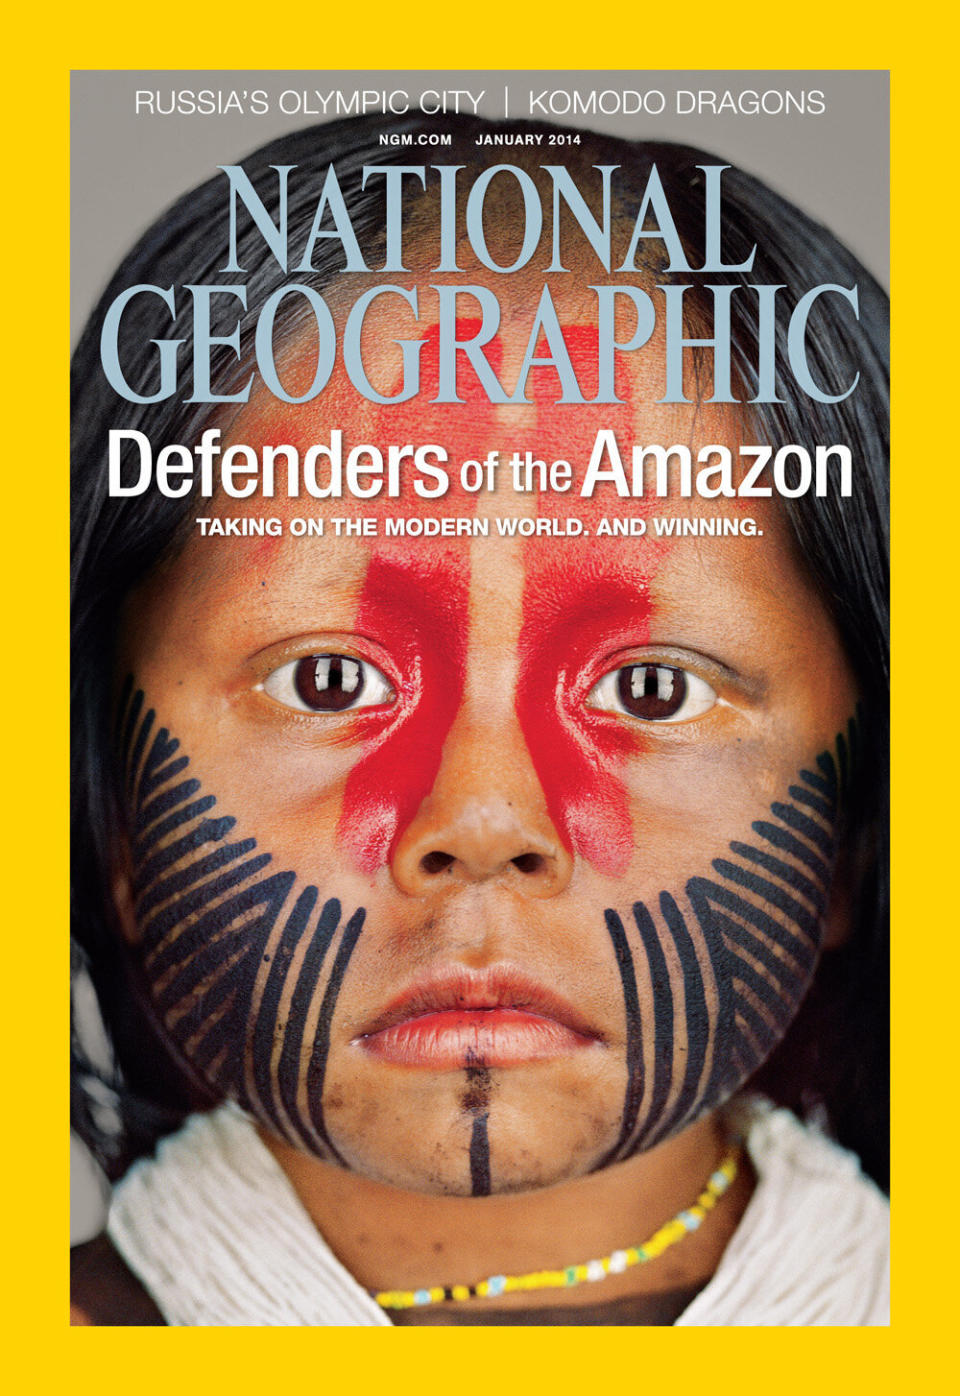 National Geographic magazine's January cover.